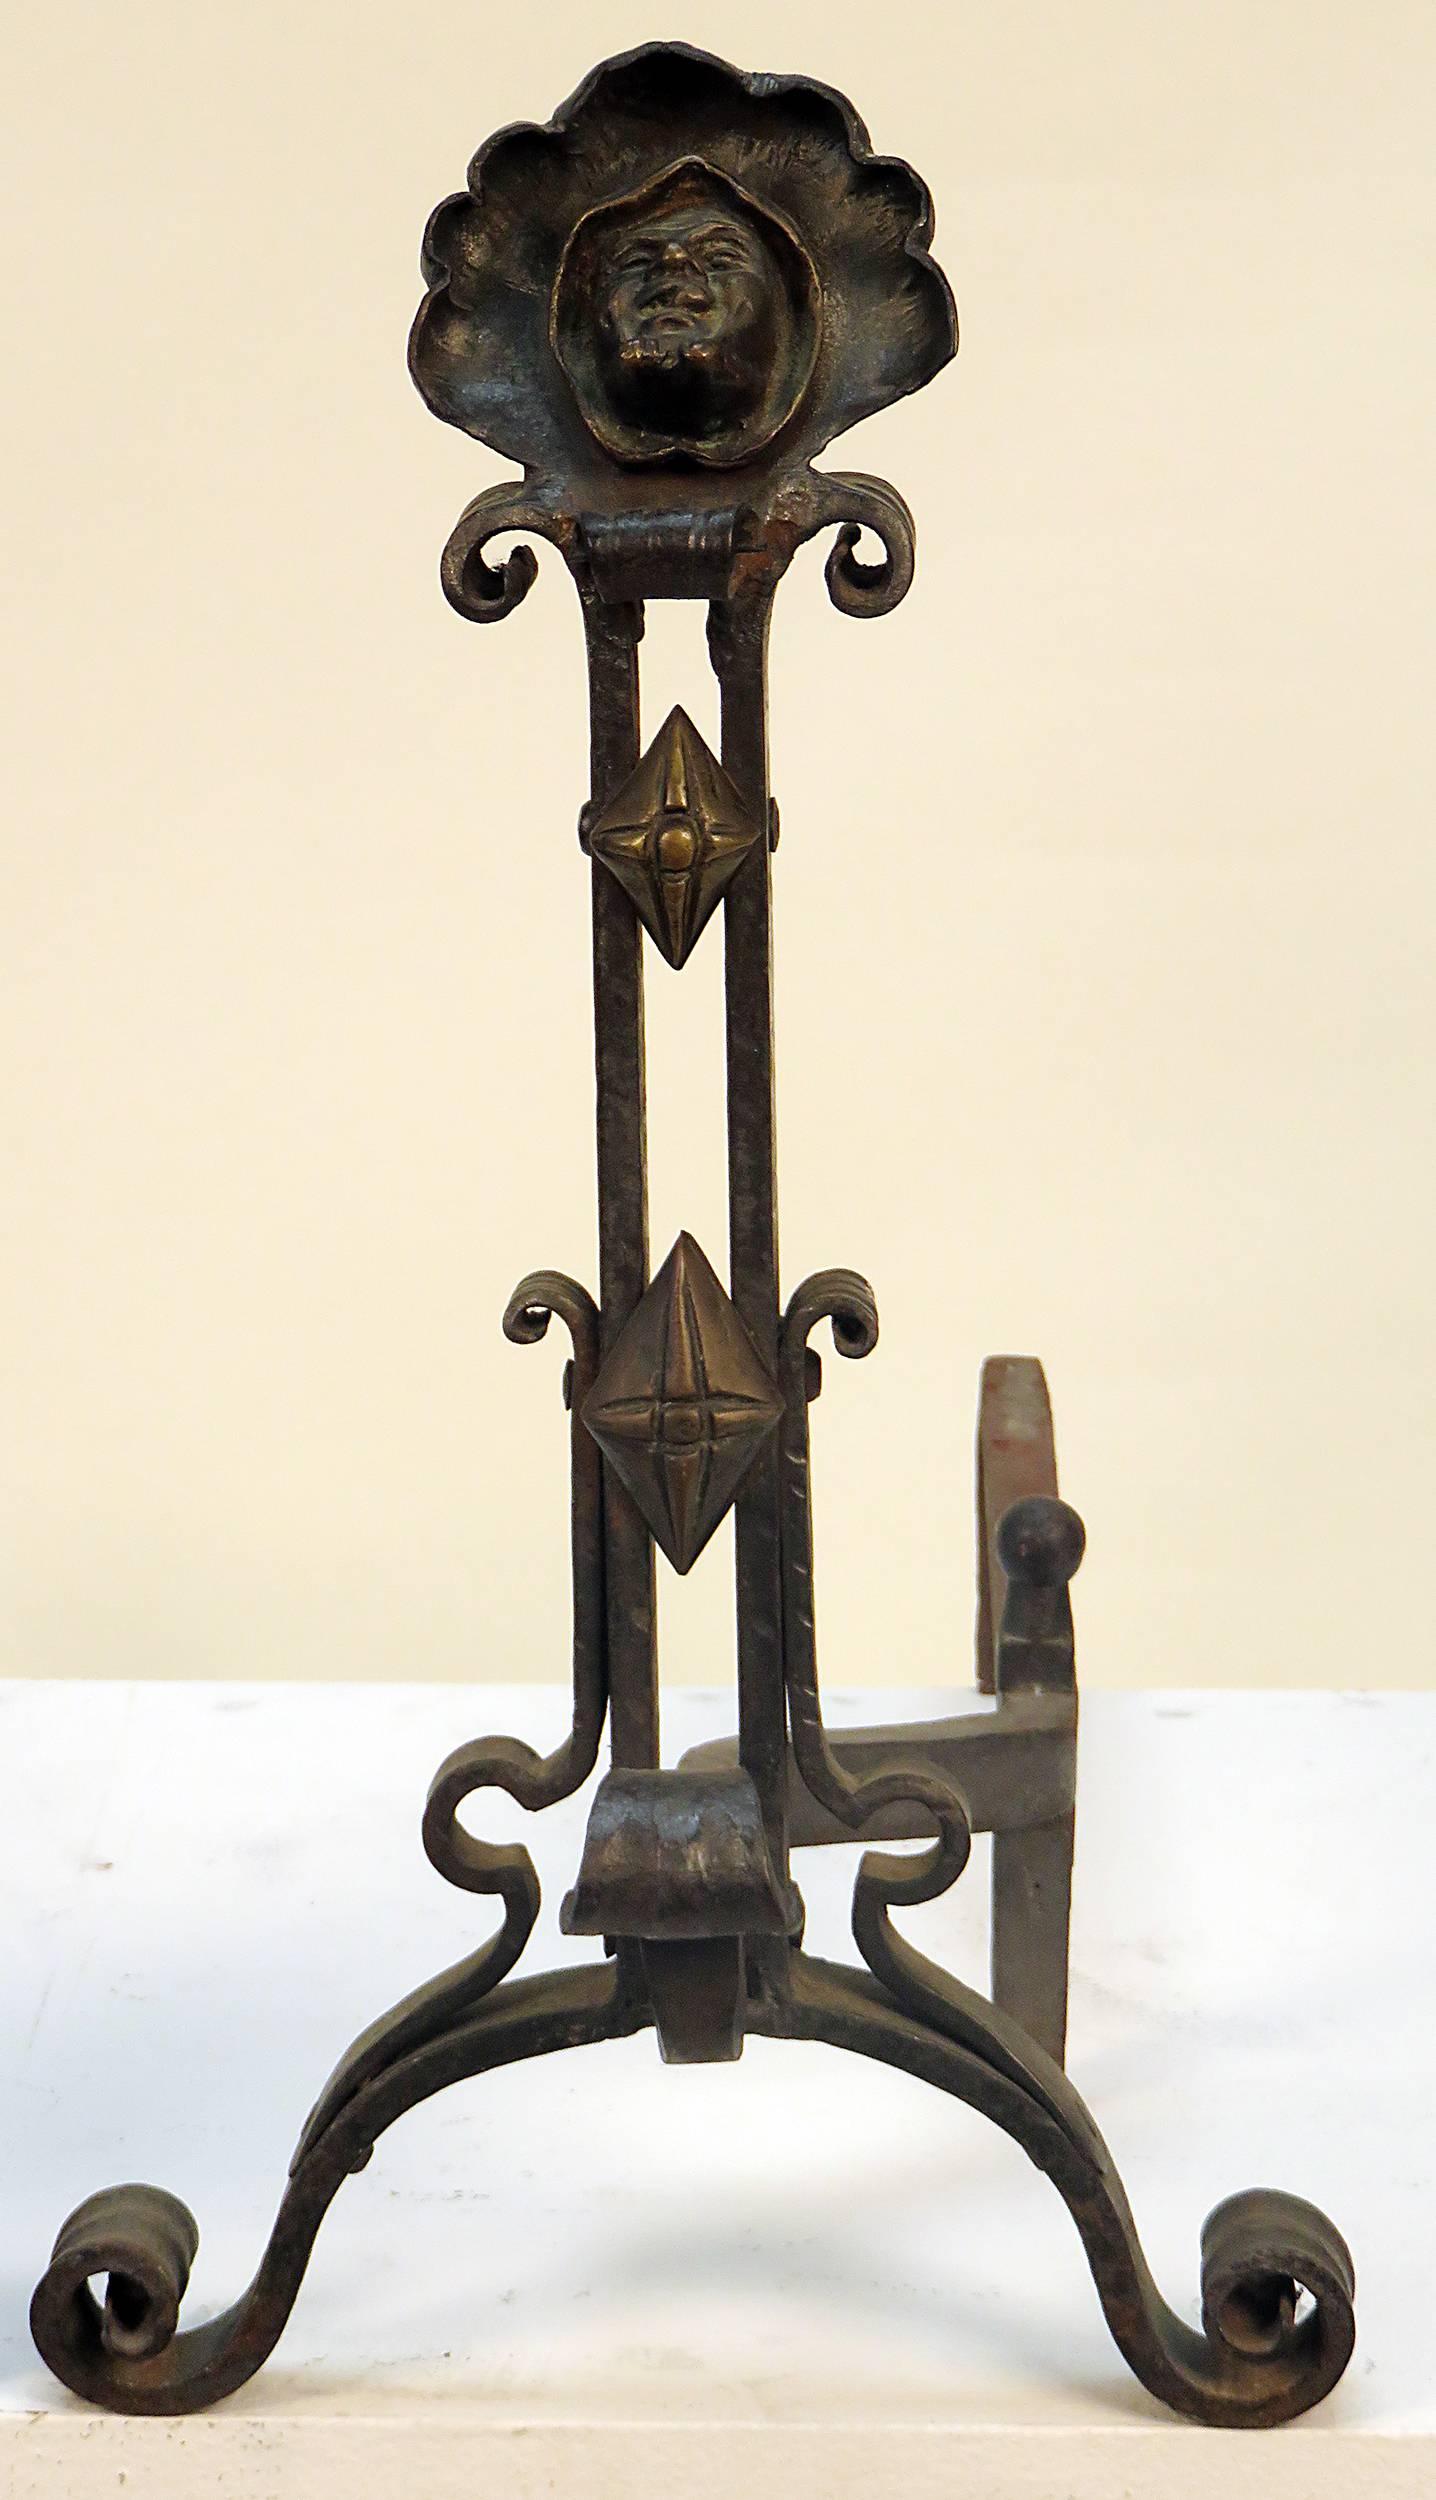 A pair of American Gothic Revival andirons in wrought iron and bronze. The andirons have a the faces of monks surrounded by their cowls. Very high quality casting and hand work in the wrought iron.  We date these to about 1870.